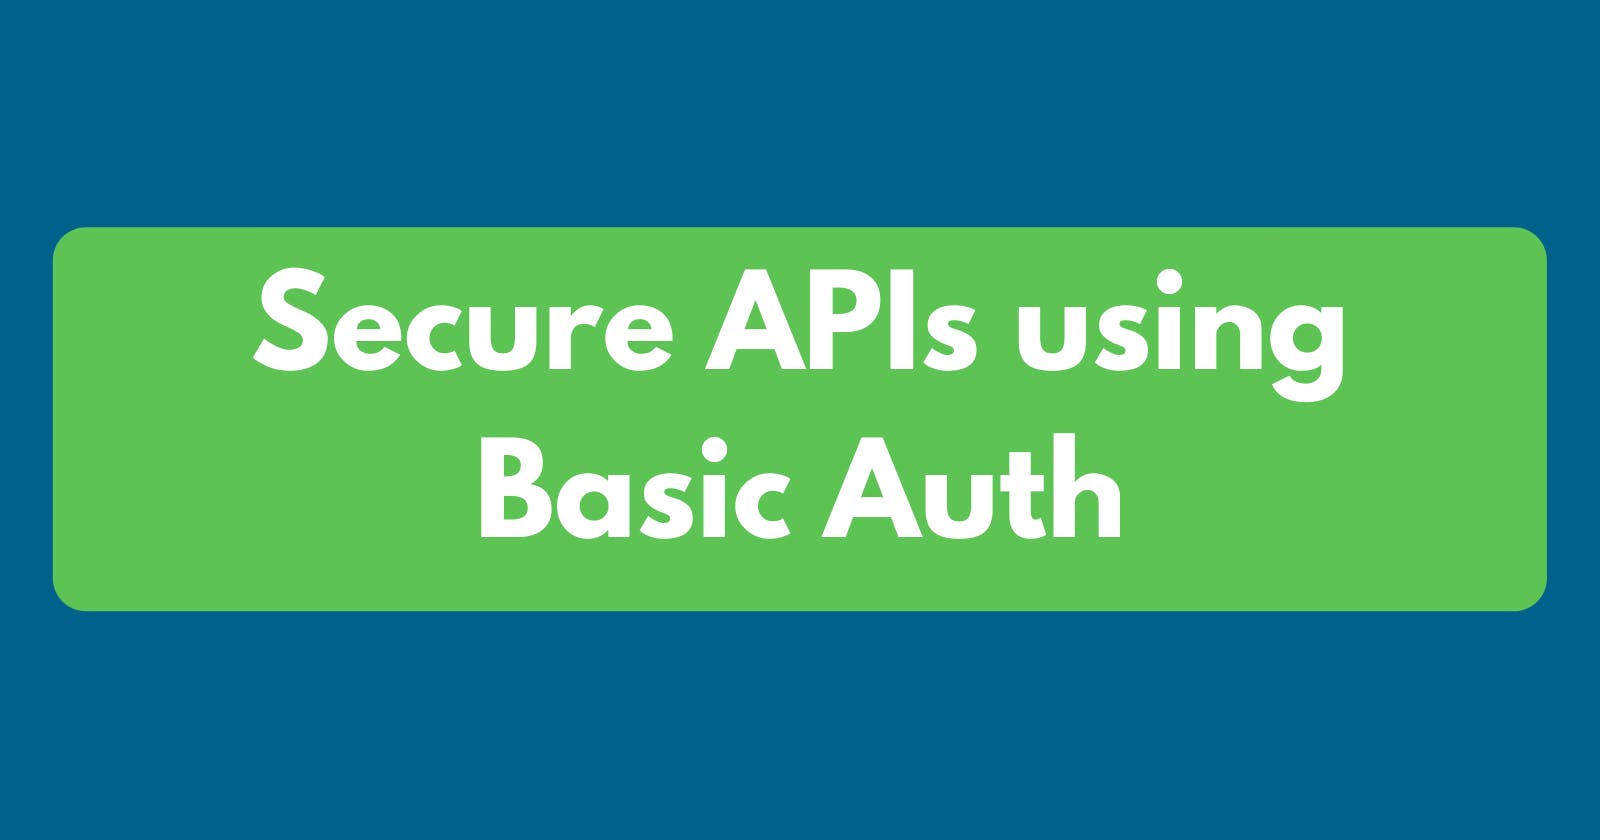 What is Basic Auth and How to secure APIs using it?